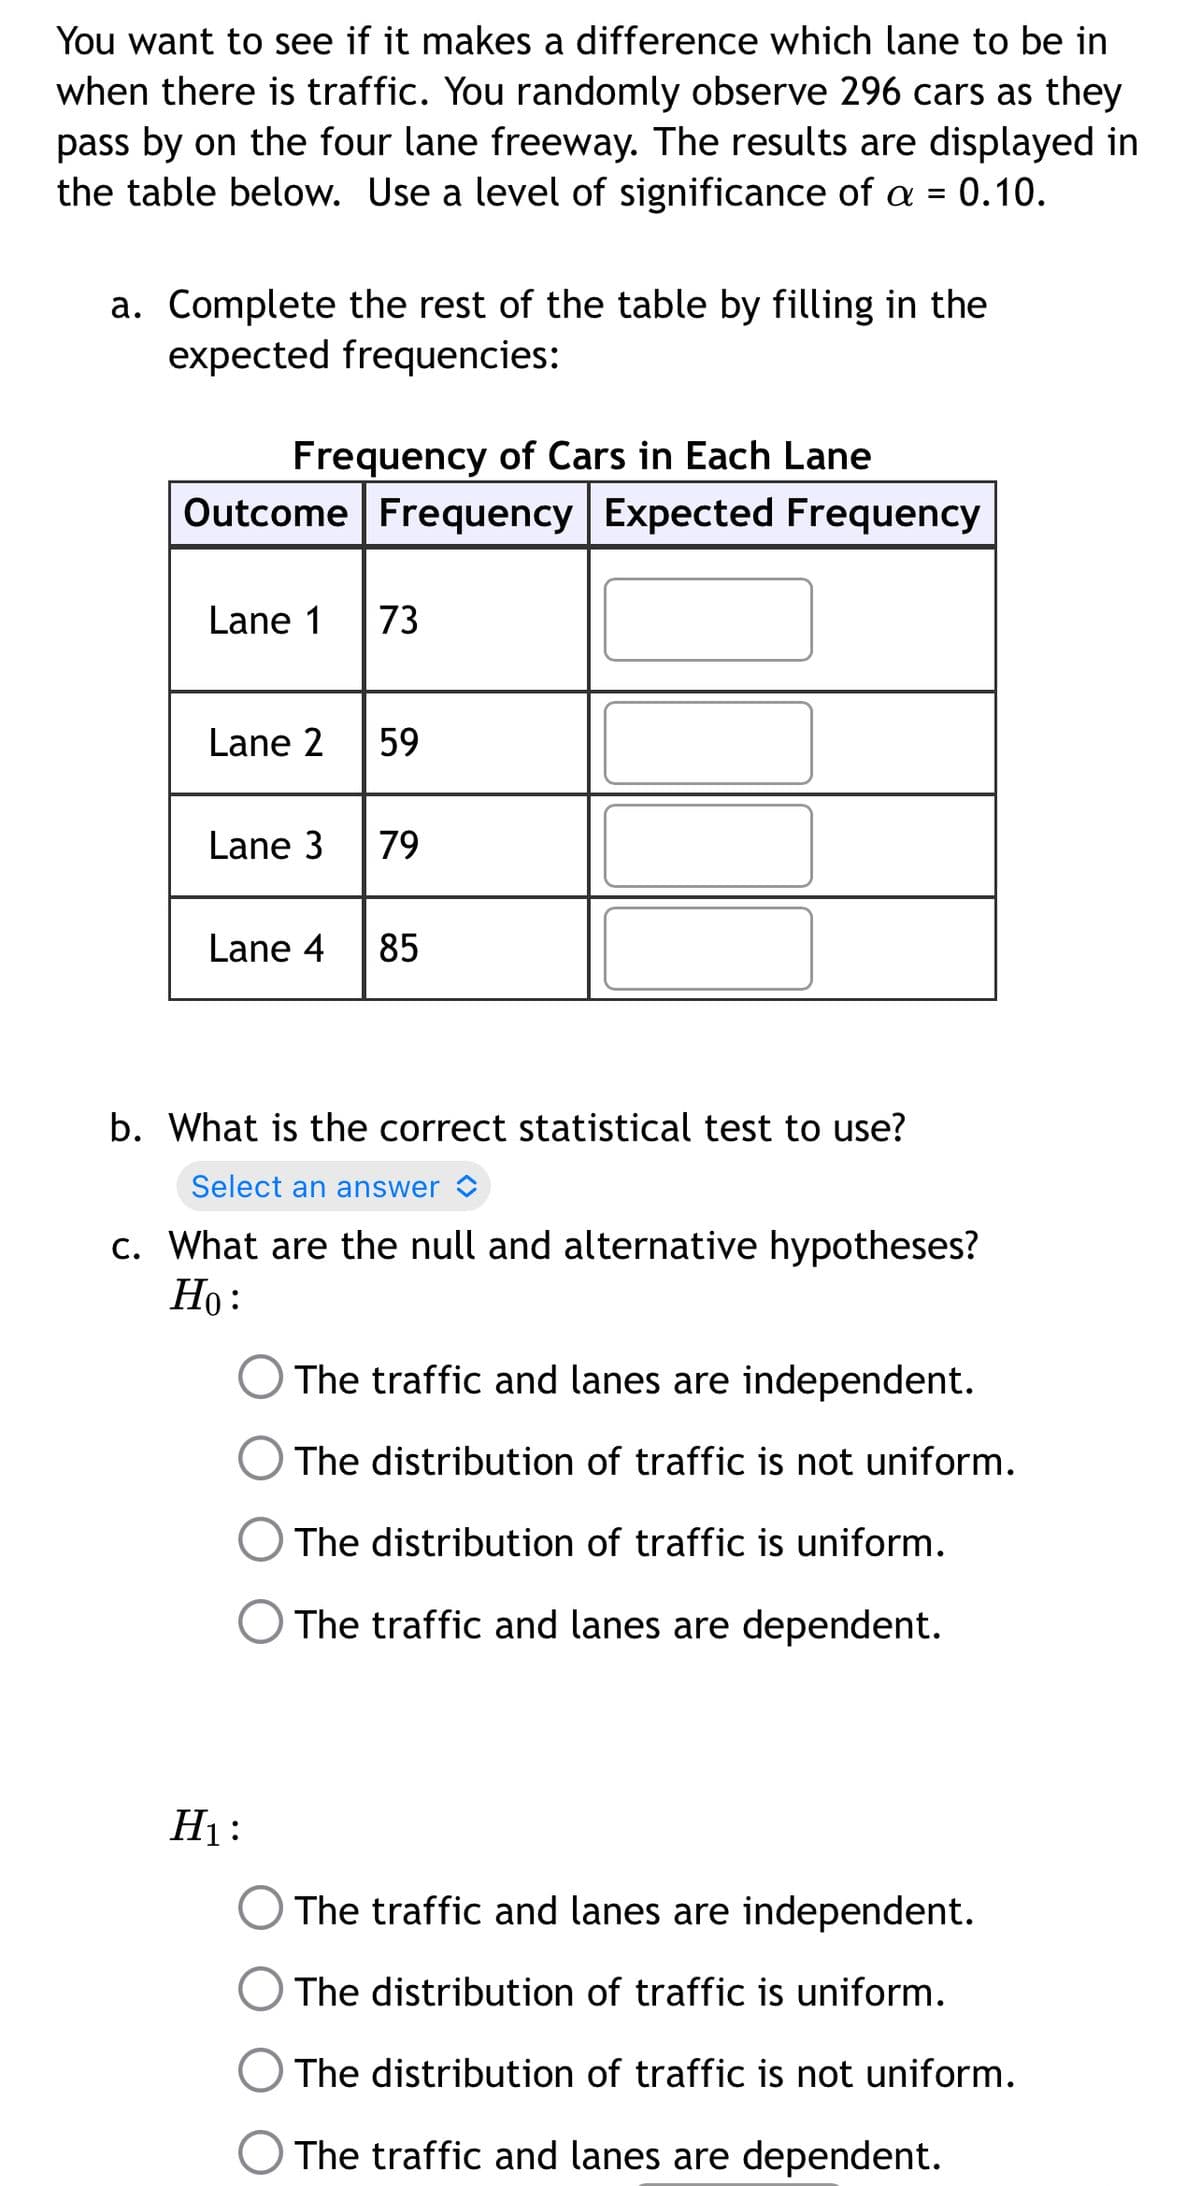 You want to see if it makes a difference which lane to be in
when there is traffic. You randomly observe 296 cars as they
pass by on the four lane freeway. The results are displayed in
the table below. Use a level of significance of a = 0.10.
a. Complete the rest of the table by filling in the
expected frequencies:
Frequency of Cars in Each Lane
Outcome Frequency Expected Frequency
Lane 1
73
Lane 2
59
Lane 3
79
Lane 4
85
b. What is the correct statistical test to use?
Select an answer <
c. What are the null and alternative hypotheses?
Ho:
The traffic and lanes are independent.
The distribution of traffic is not uniform.
The distribution of traffic is uniform.
The traffic and lanes are dependent.
H1:
The traffic and lanes are independent.
O The distribution of traffic is uniform.
The distribution of traffic is not uniform.
The traffic and lanes are dependent.
